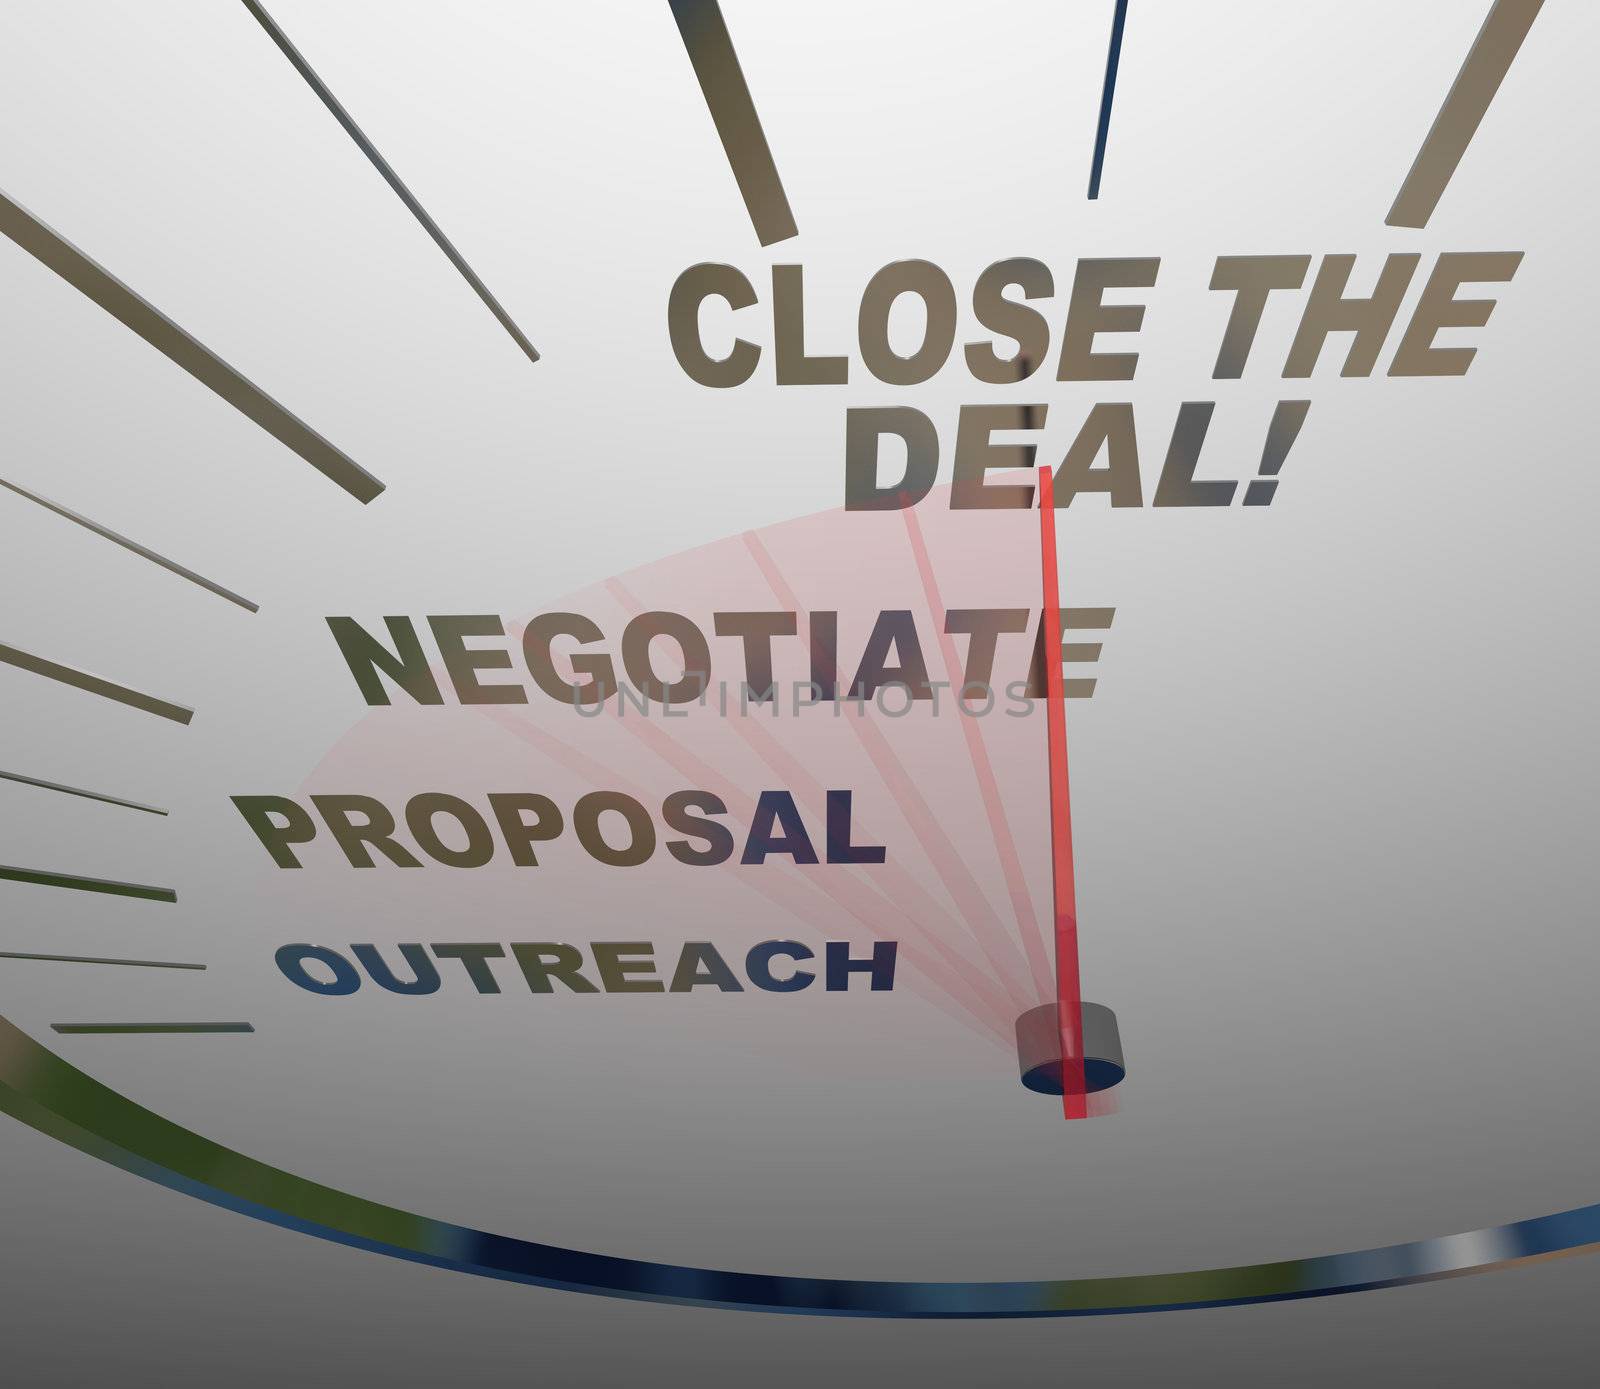 A speedometer with words showing the steps of a successful sale -- outreach, proposal, negotiate, and close the deal -- which you can follow to turn a prospect into a new customer